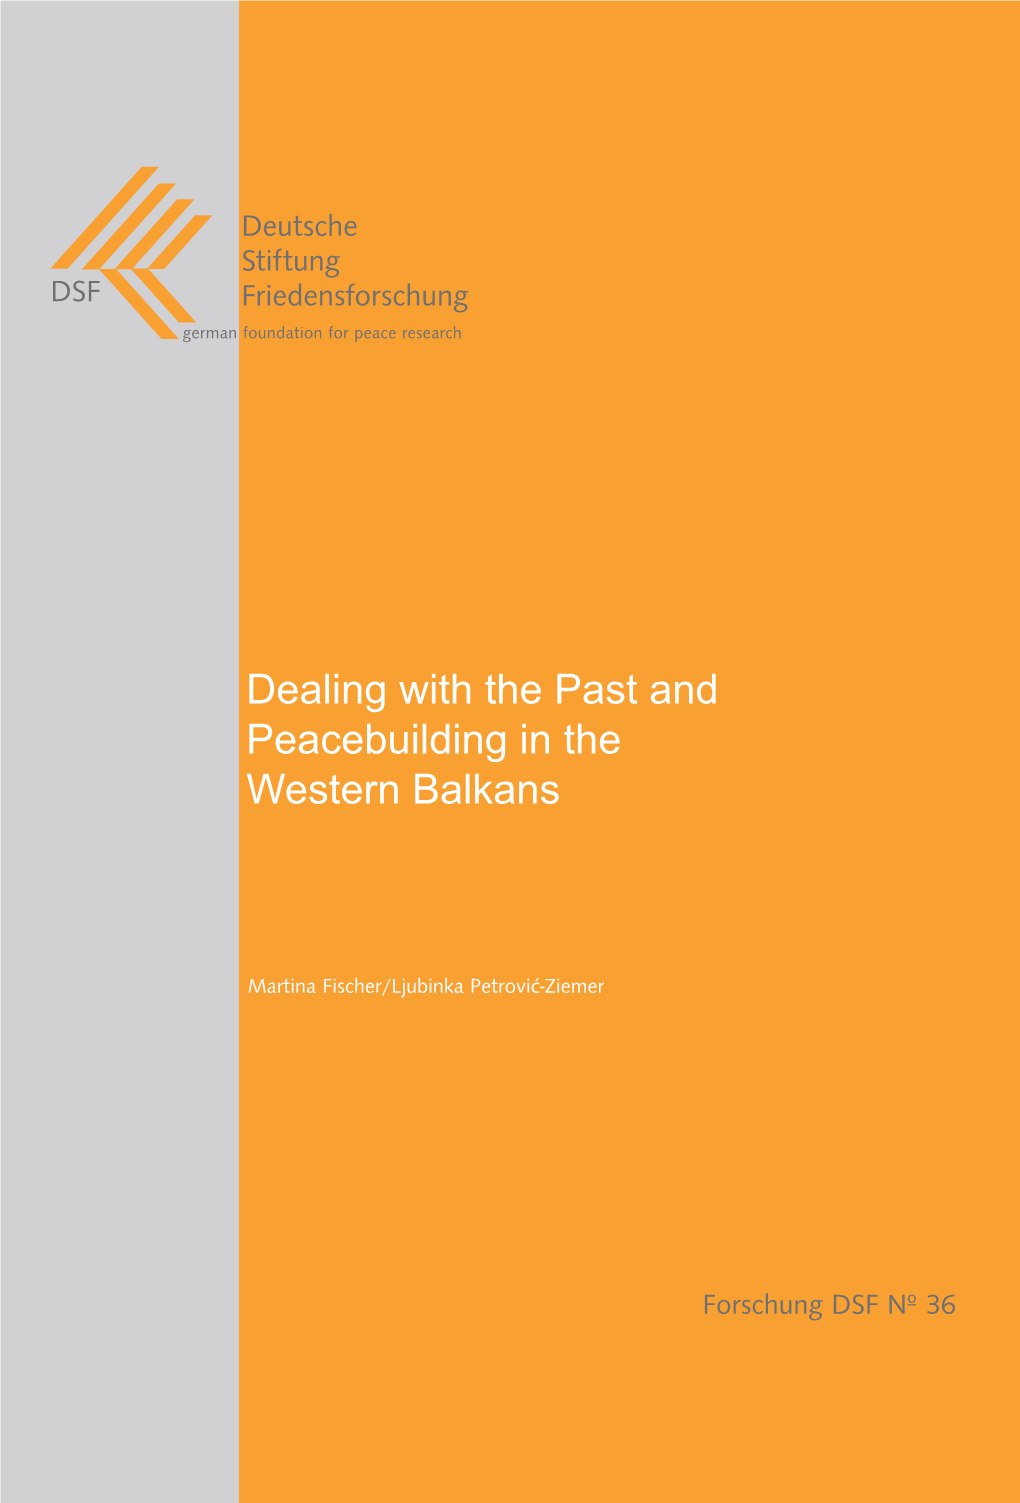 Dealing with the Past and Peacebuilding in the Western Balkans